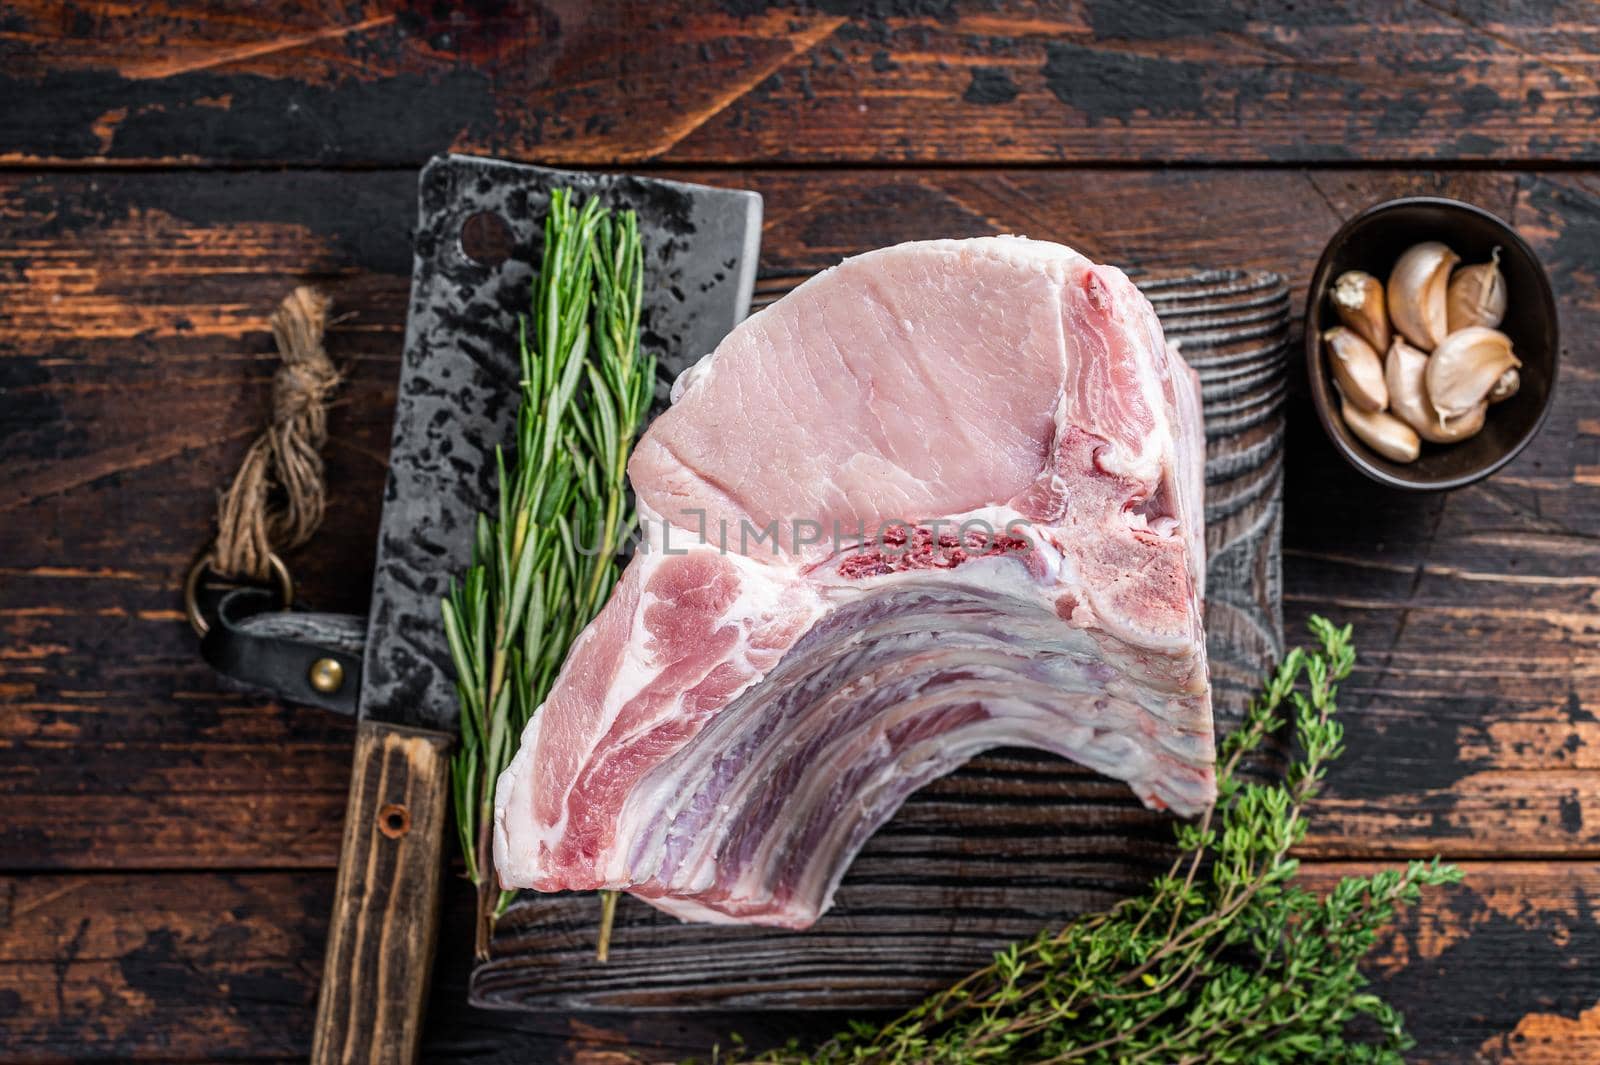 Raw rack of pork loin chops with ribs on a butcher board with meat cleaver. Dark wooden background. Top view.